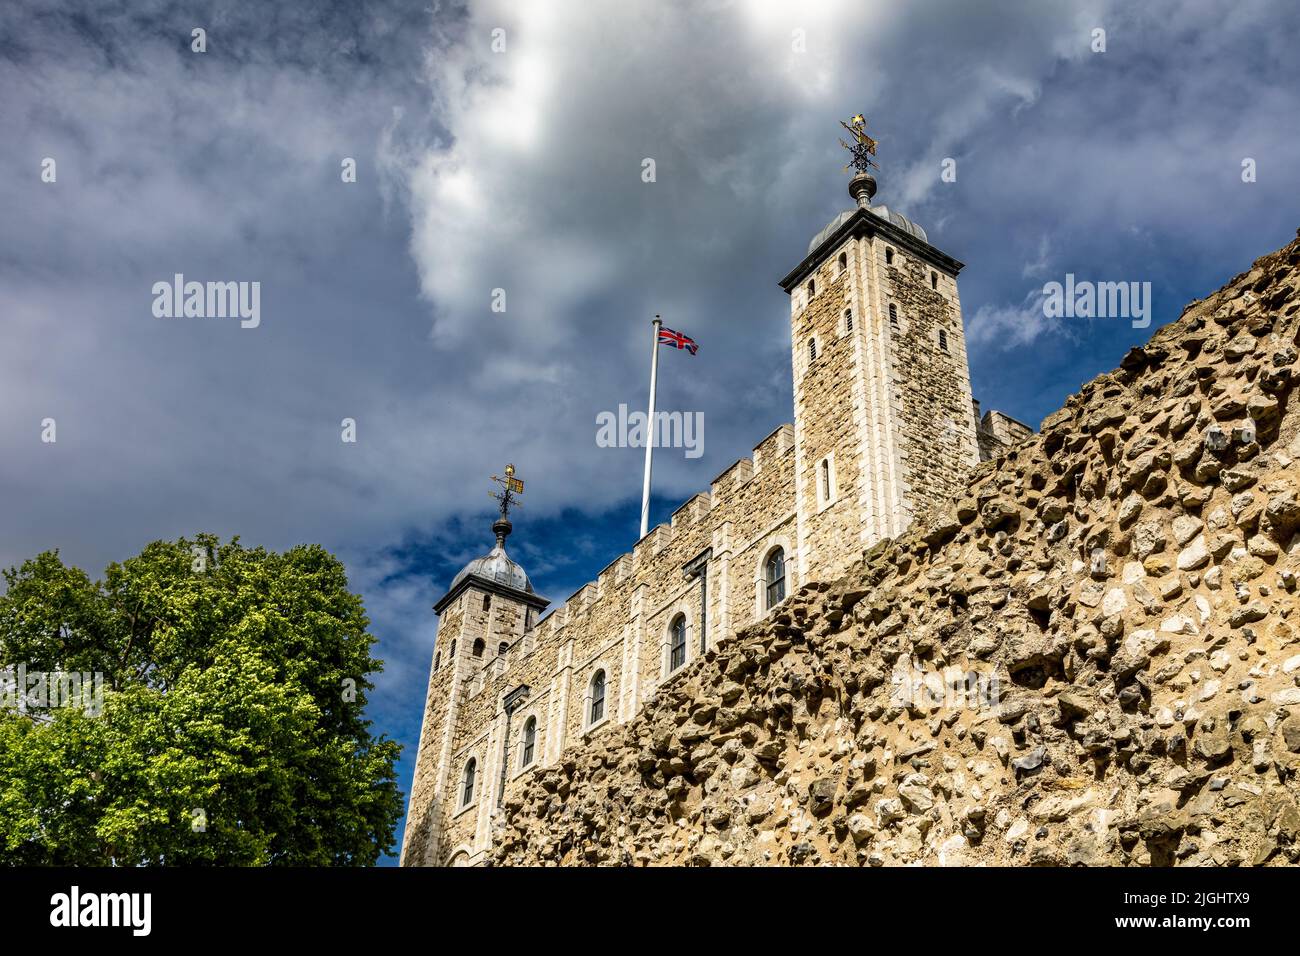 The iconic White Tower of the Tower of London. Built by William the Conqueror in the 11th century, and use as a Palace, Fortress and prison over the c Stock Photo